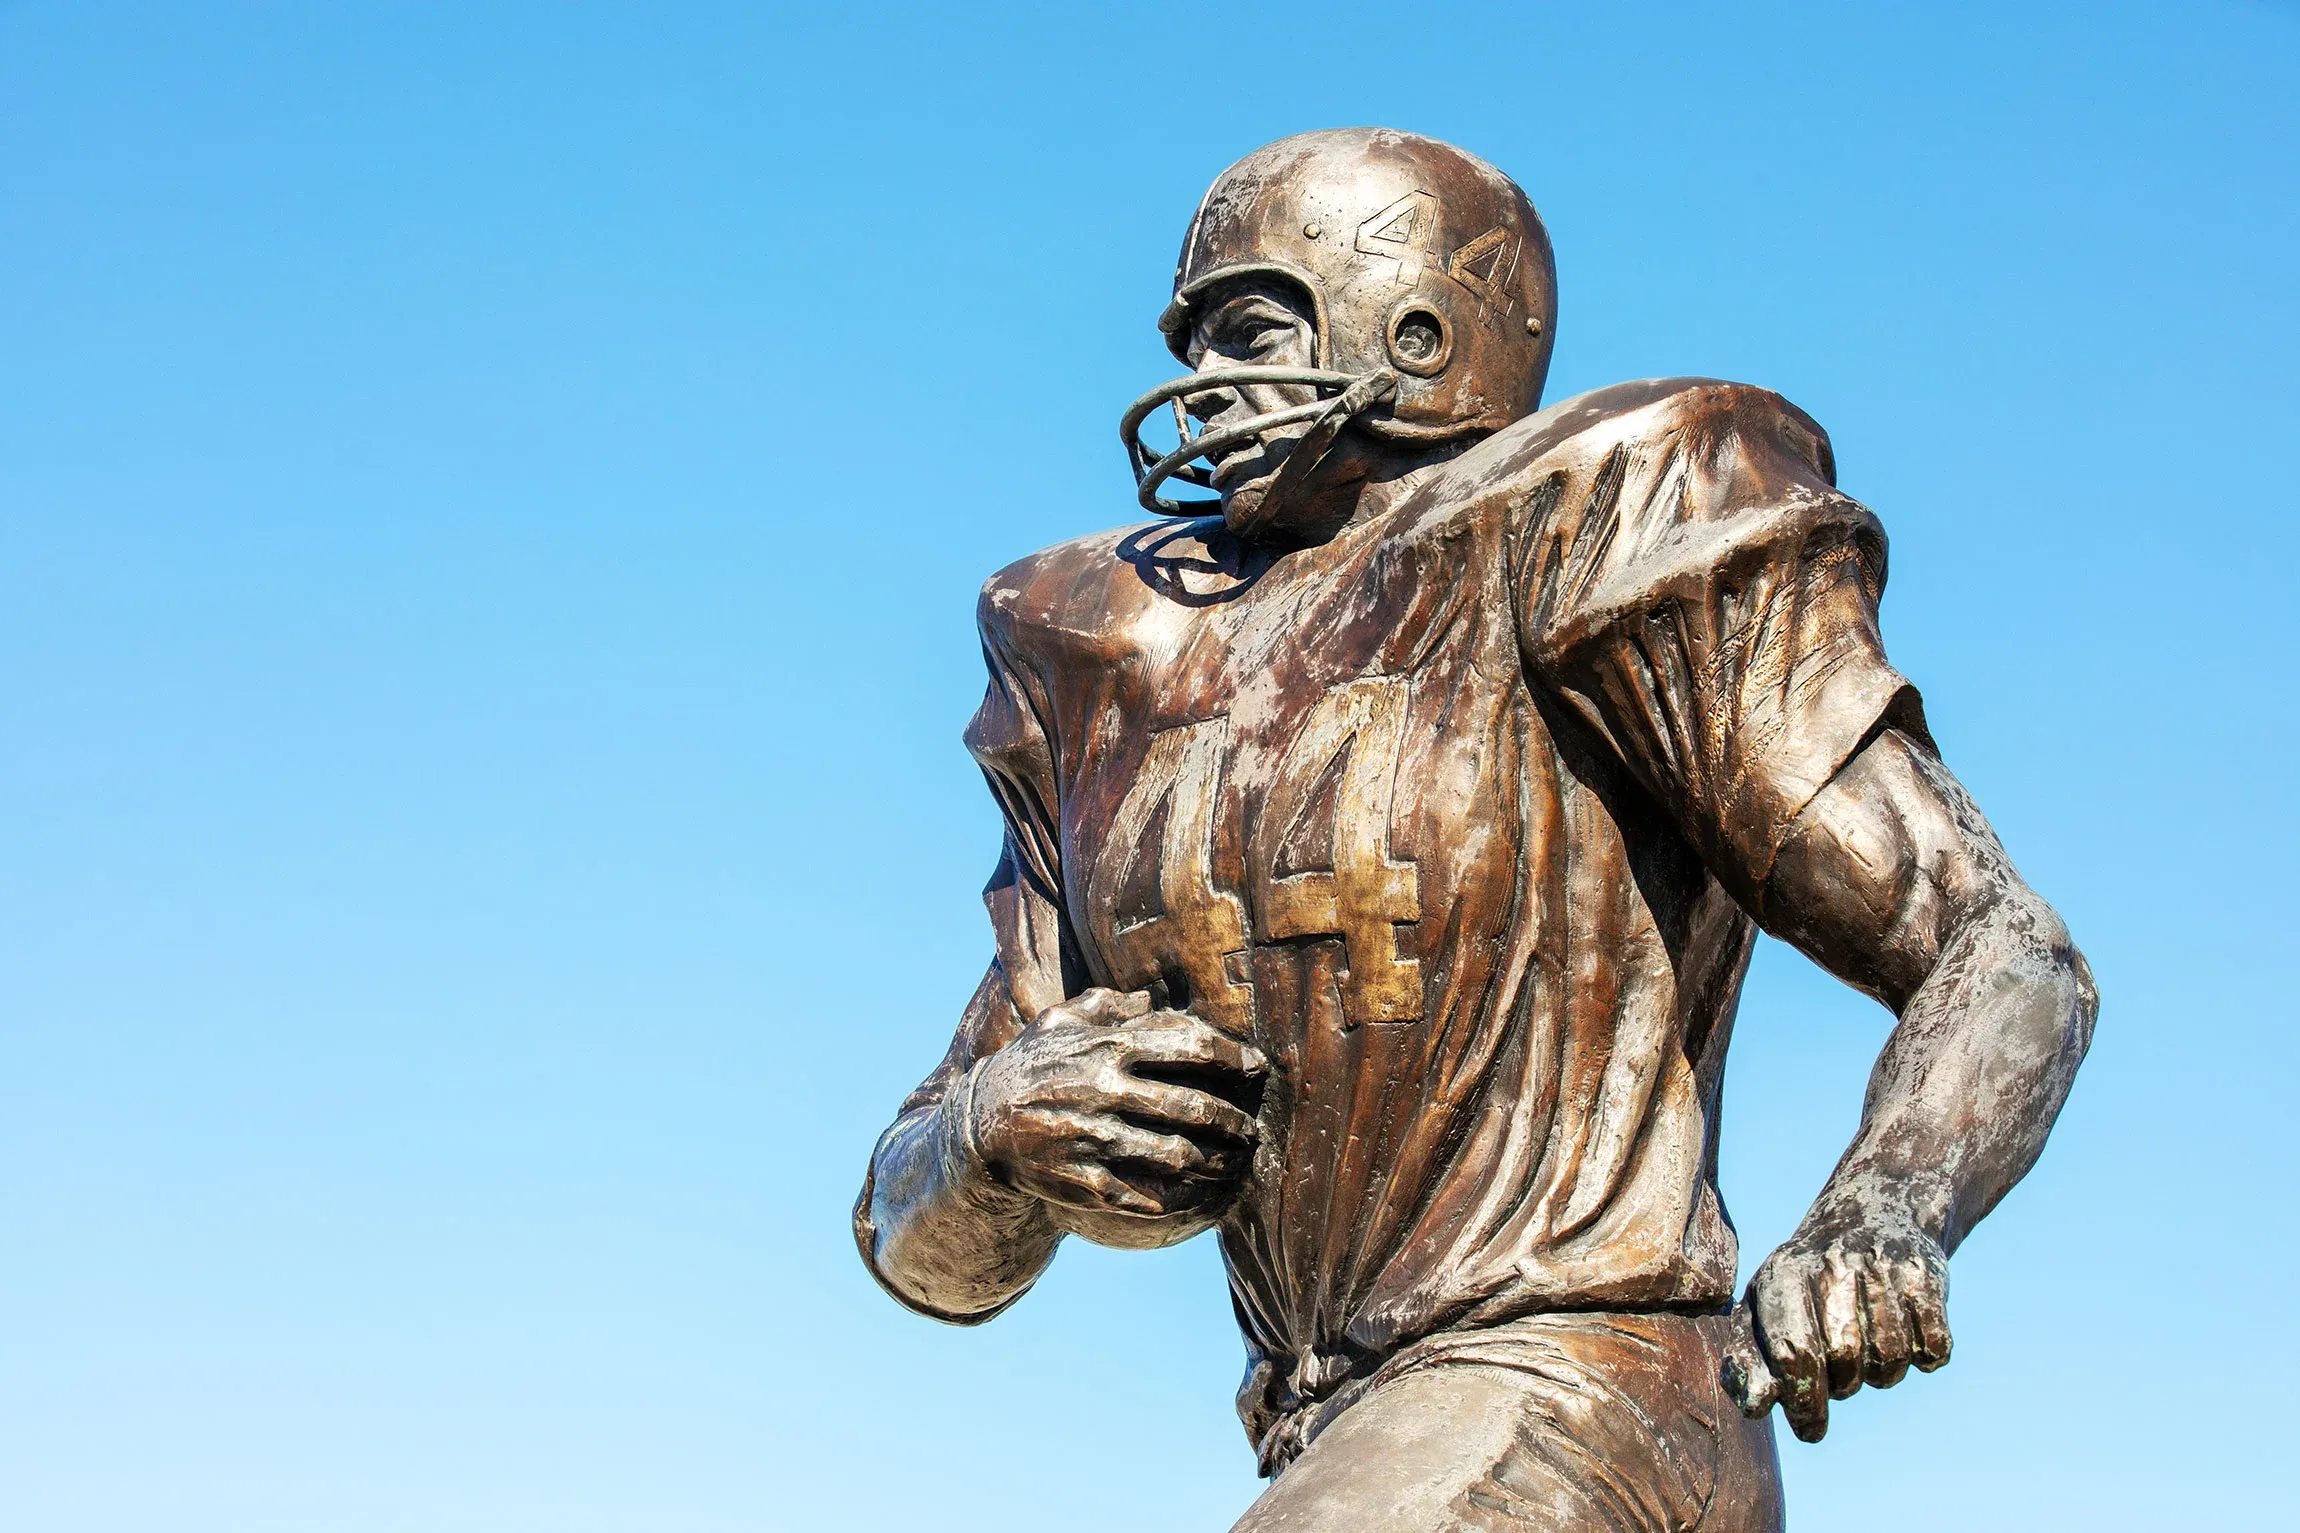 Statue of football player with number forty four jersey.